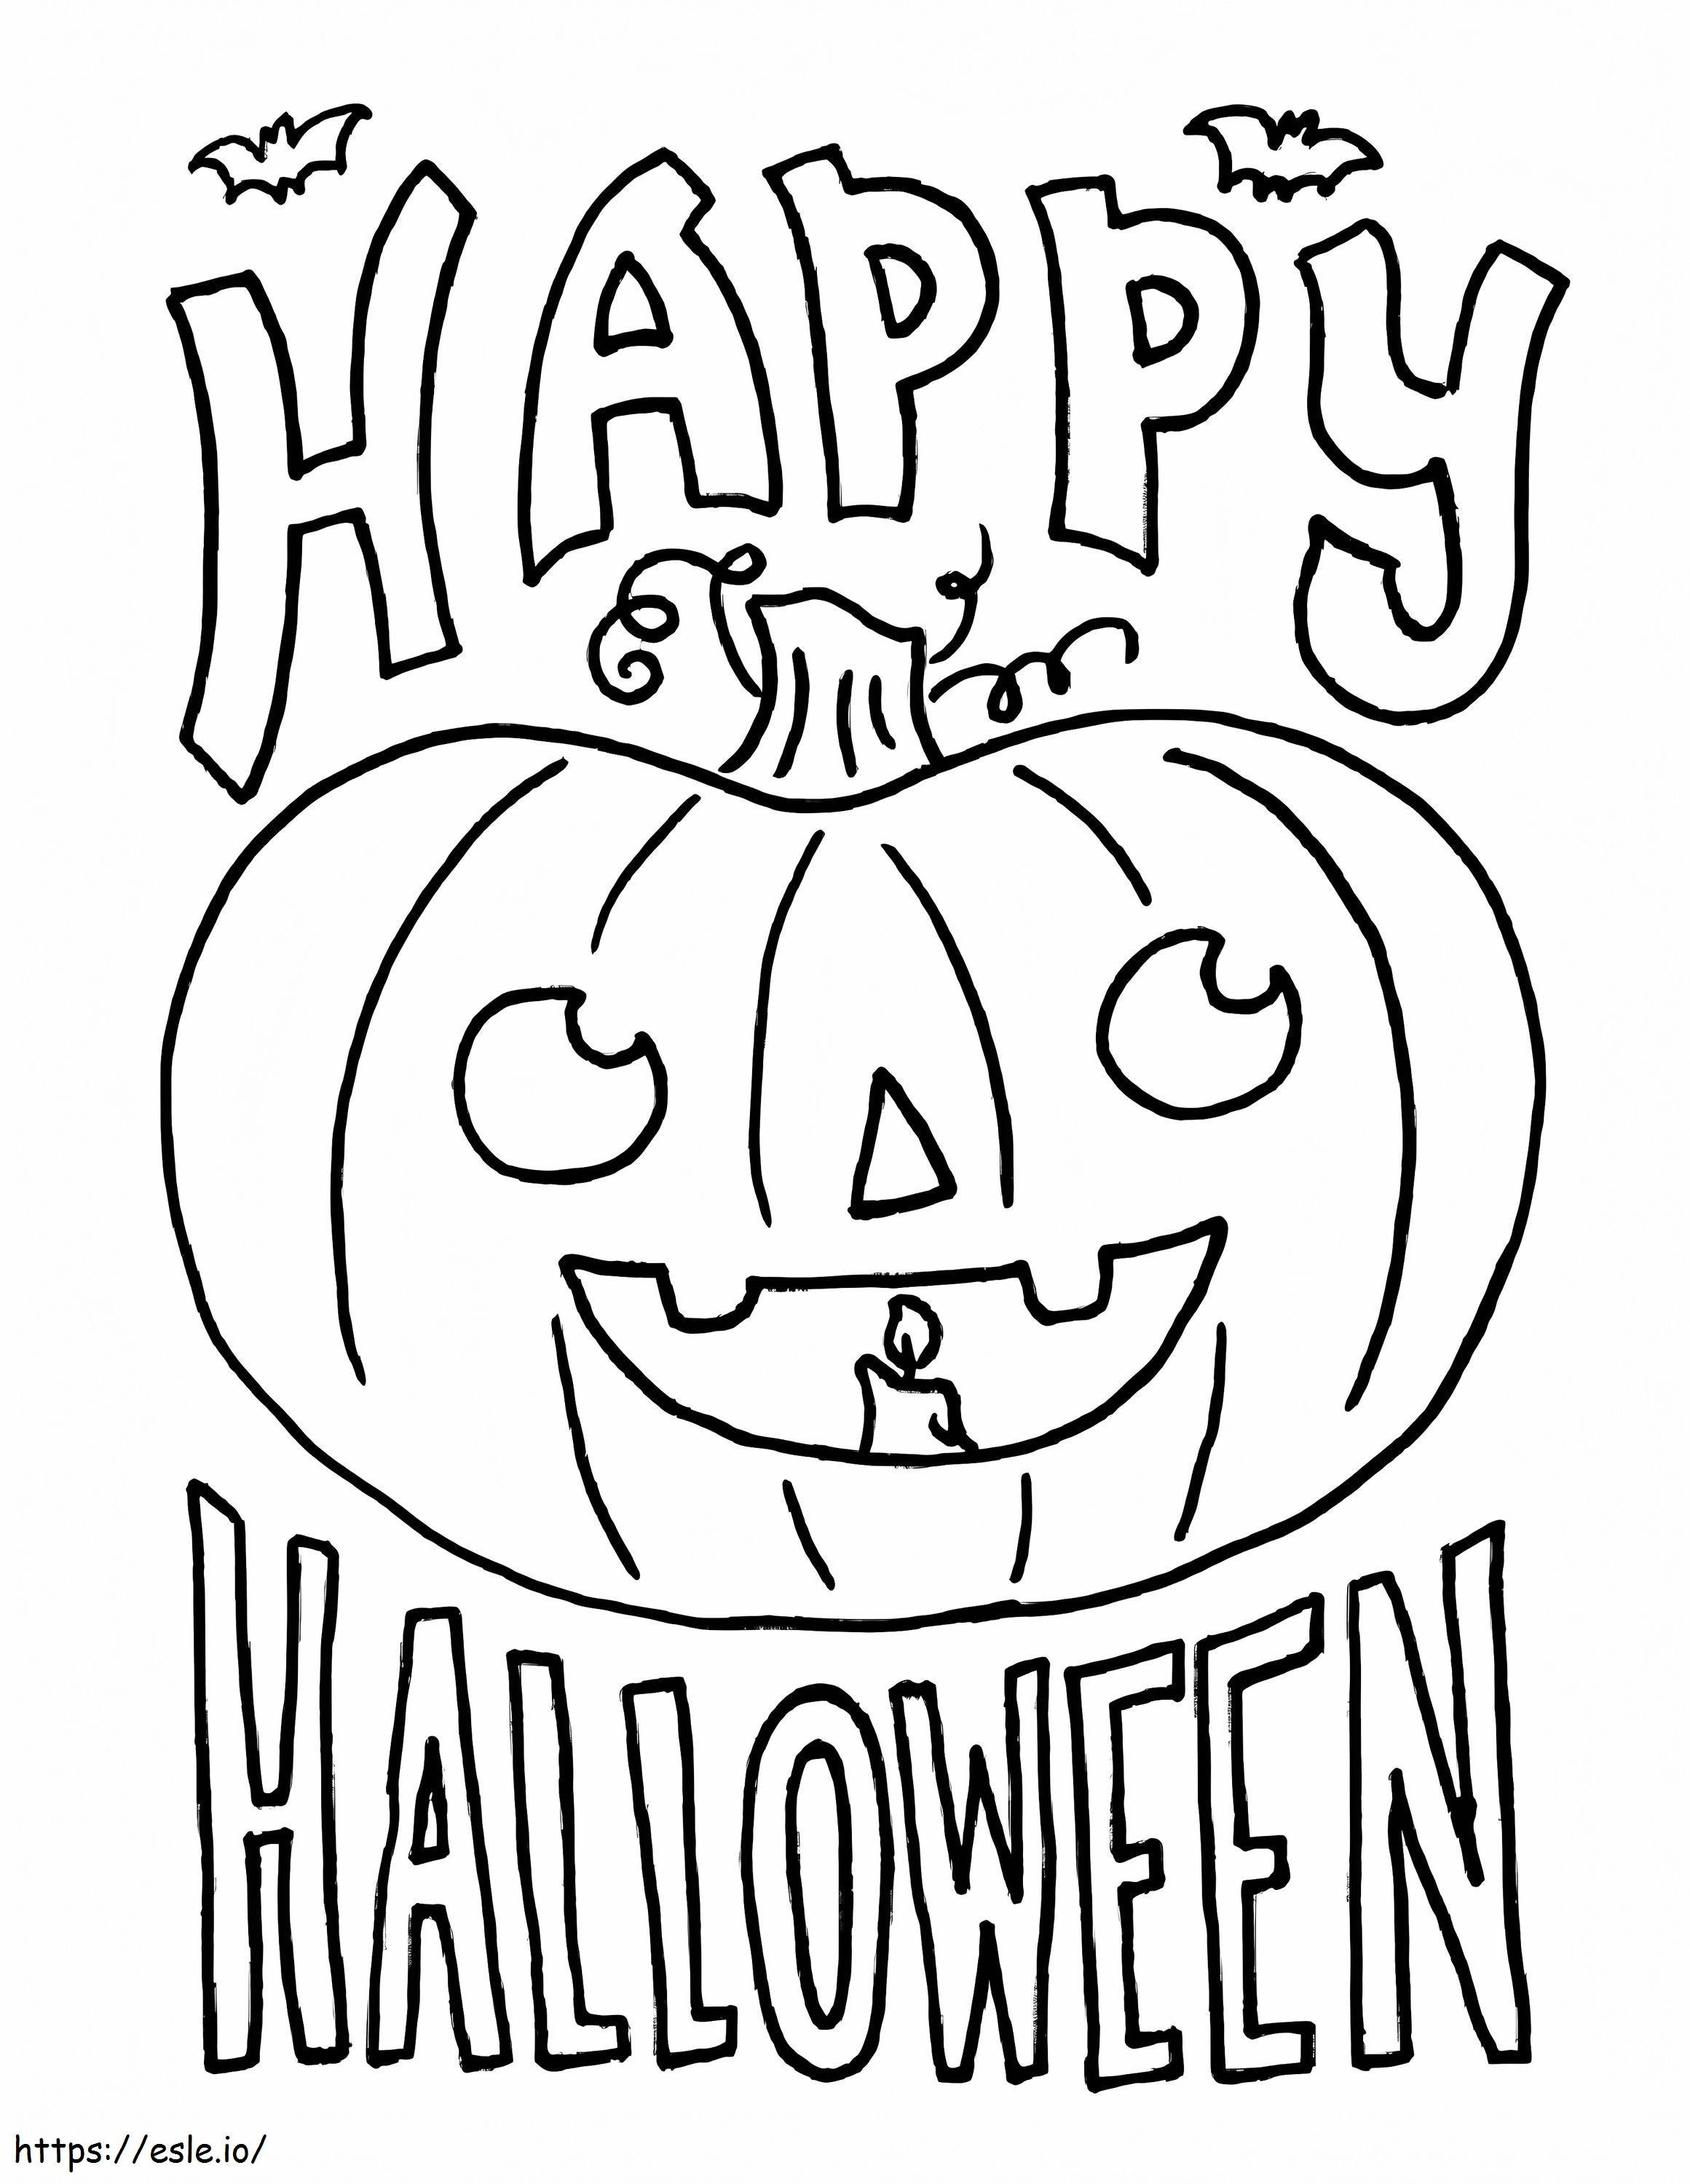 1539676200 Captivating Haloween Colouring To Good Halloween With coloring page